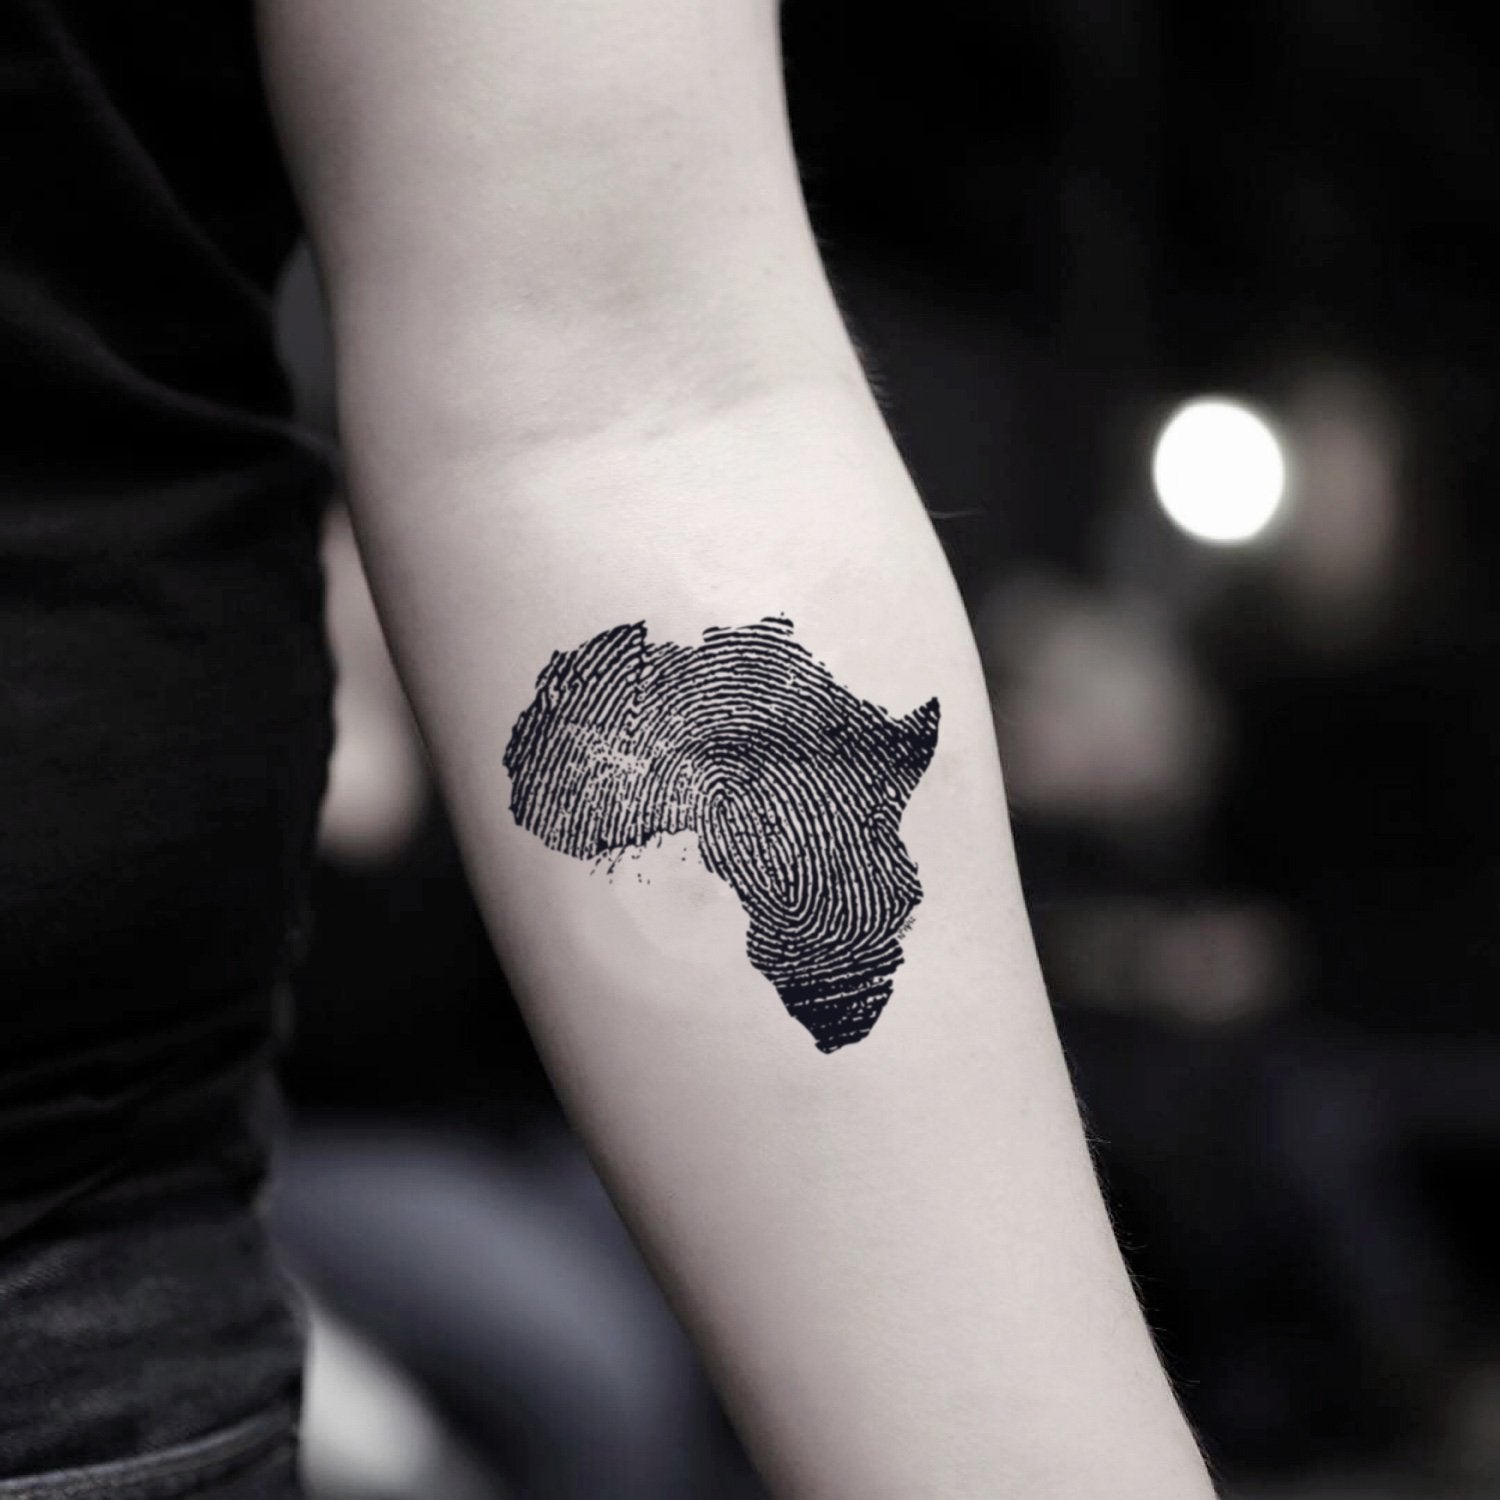 fake small west african continent illustrative temporary tattoo sticker design idea on inner arm